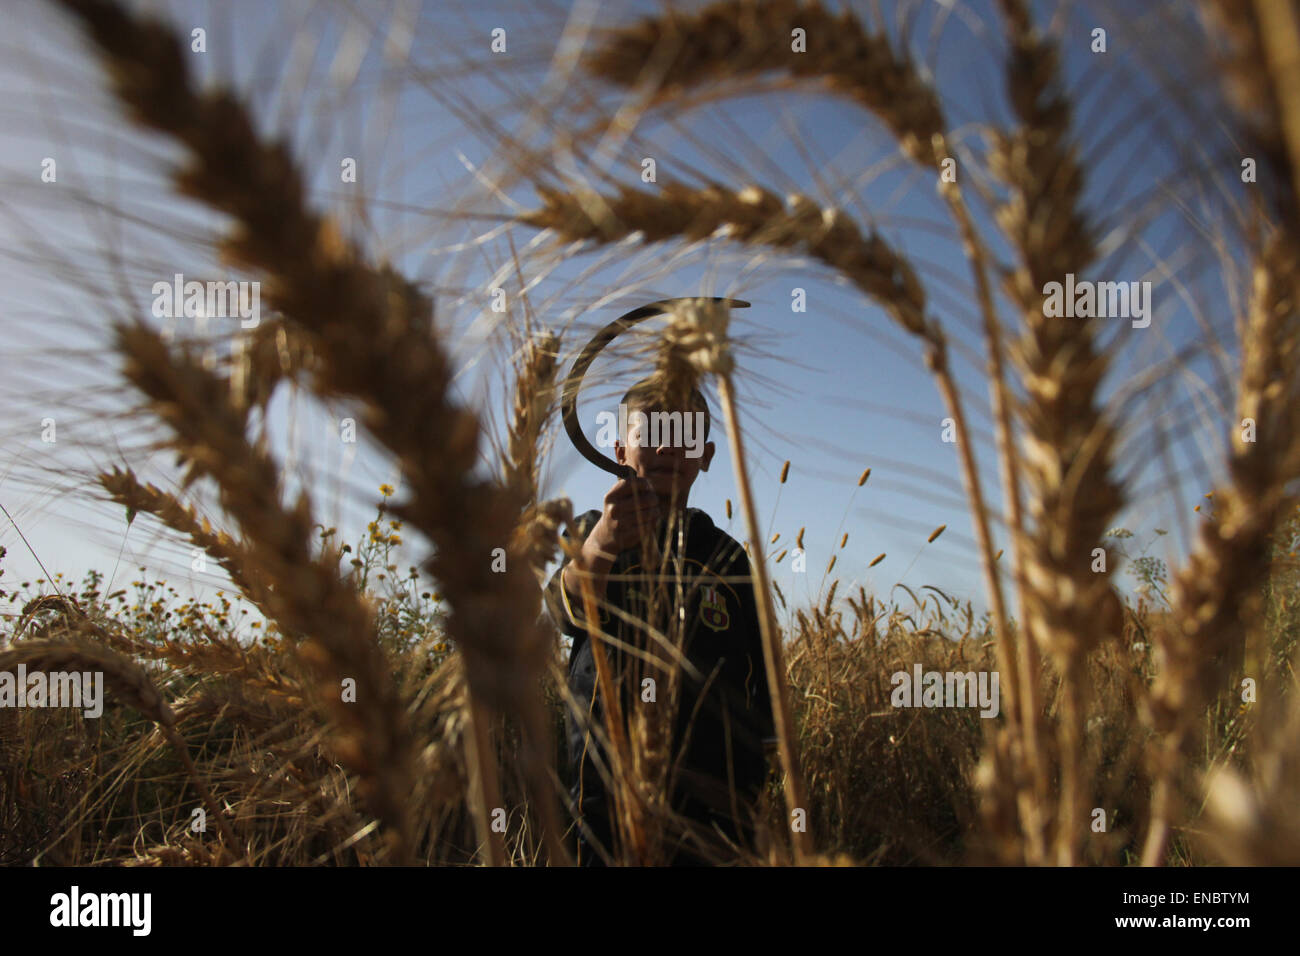 Khan Yunis, Palestine. 02nd May, 2015. Khan Younis, Gaza Strip, Palestinian Territory - A Palestinian farmer collects wheat stalks during the annual harvest in a field in Khuza'a east of Khan Yunis, in the southern Gaza Strip. Khan Younis, Gaza Strip, Palestinian Territory - Palestinian farmers collects wheat stalks during the annual harvest in a field in Khuza'a east of Khan Yunis, in the southern Gaza Strip. © Ahmed Hjazy/Pacific Press/Alamy Live News Stock Photo